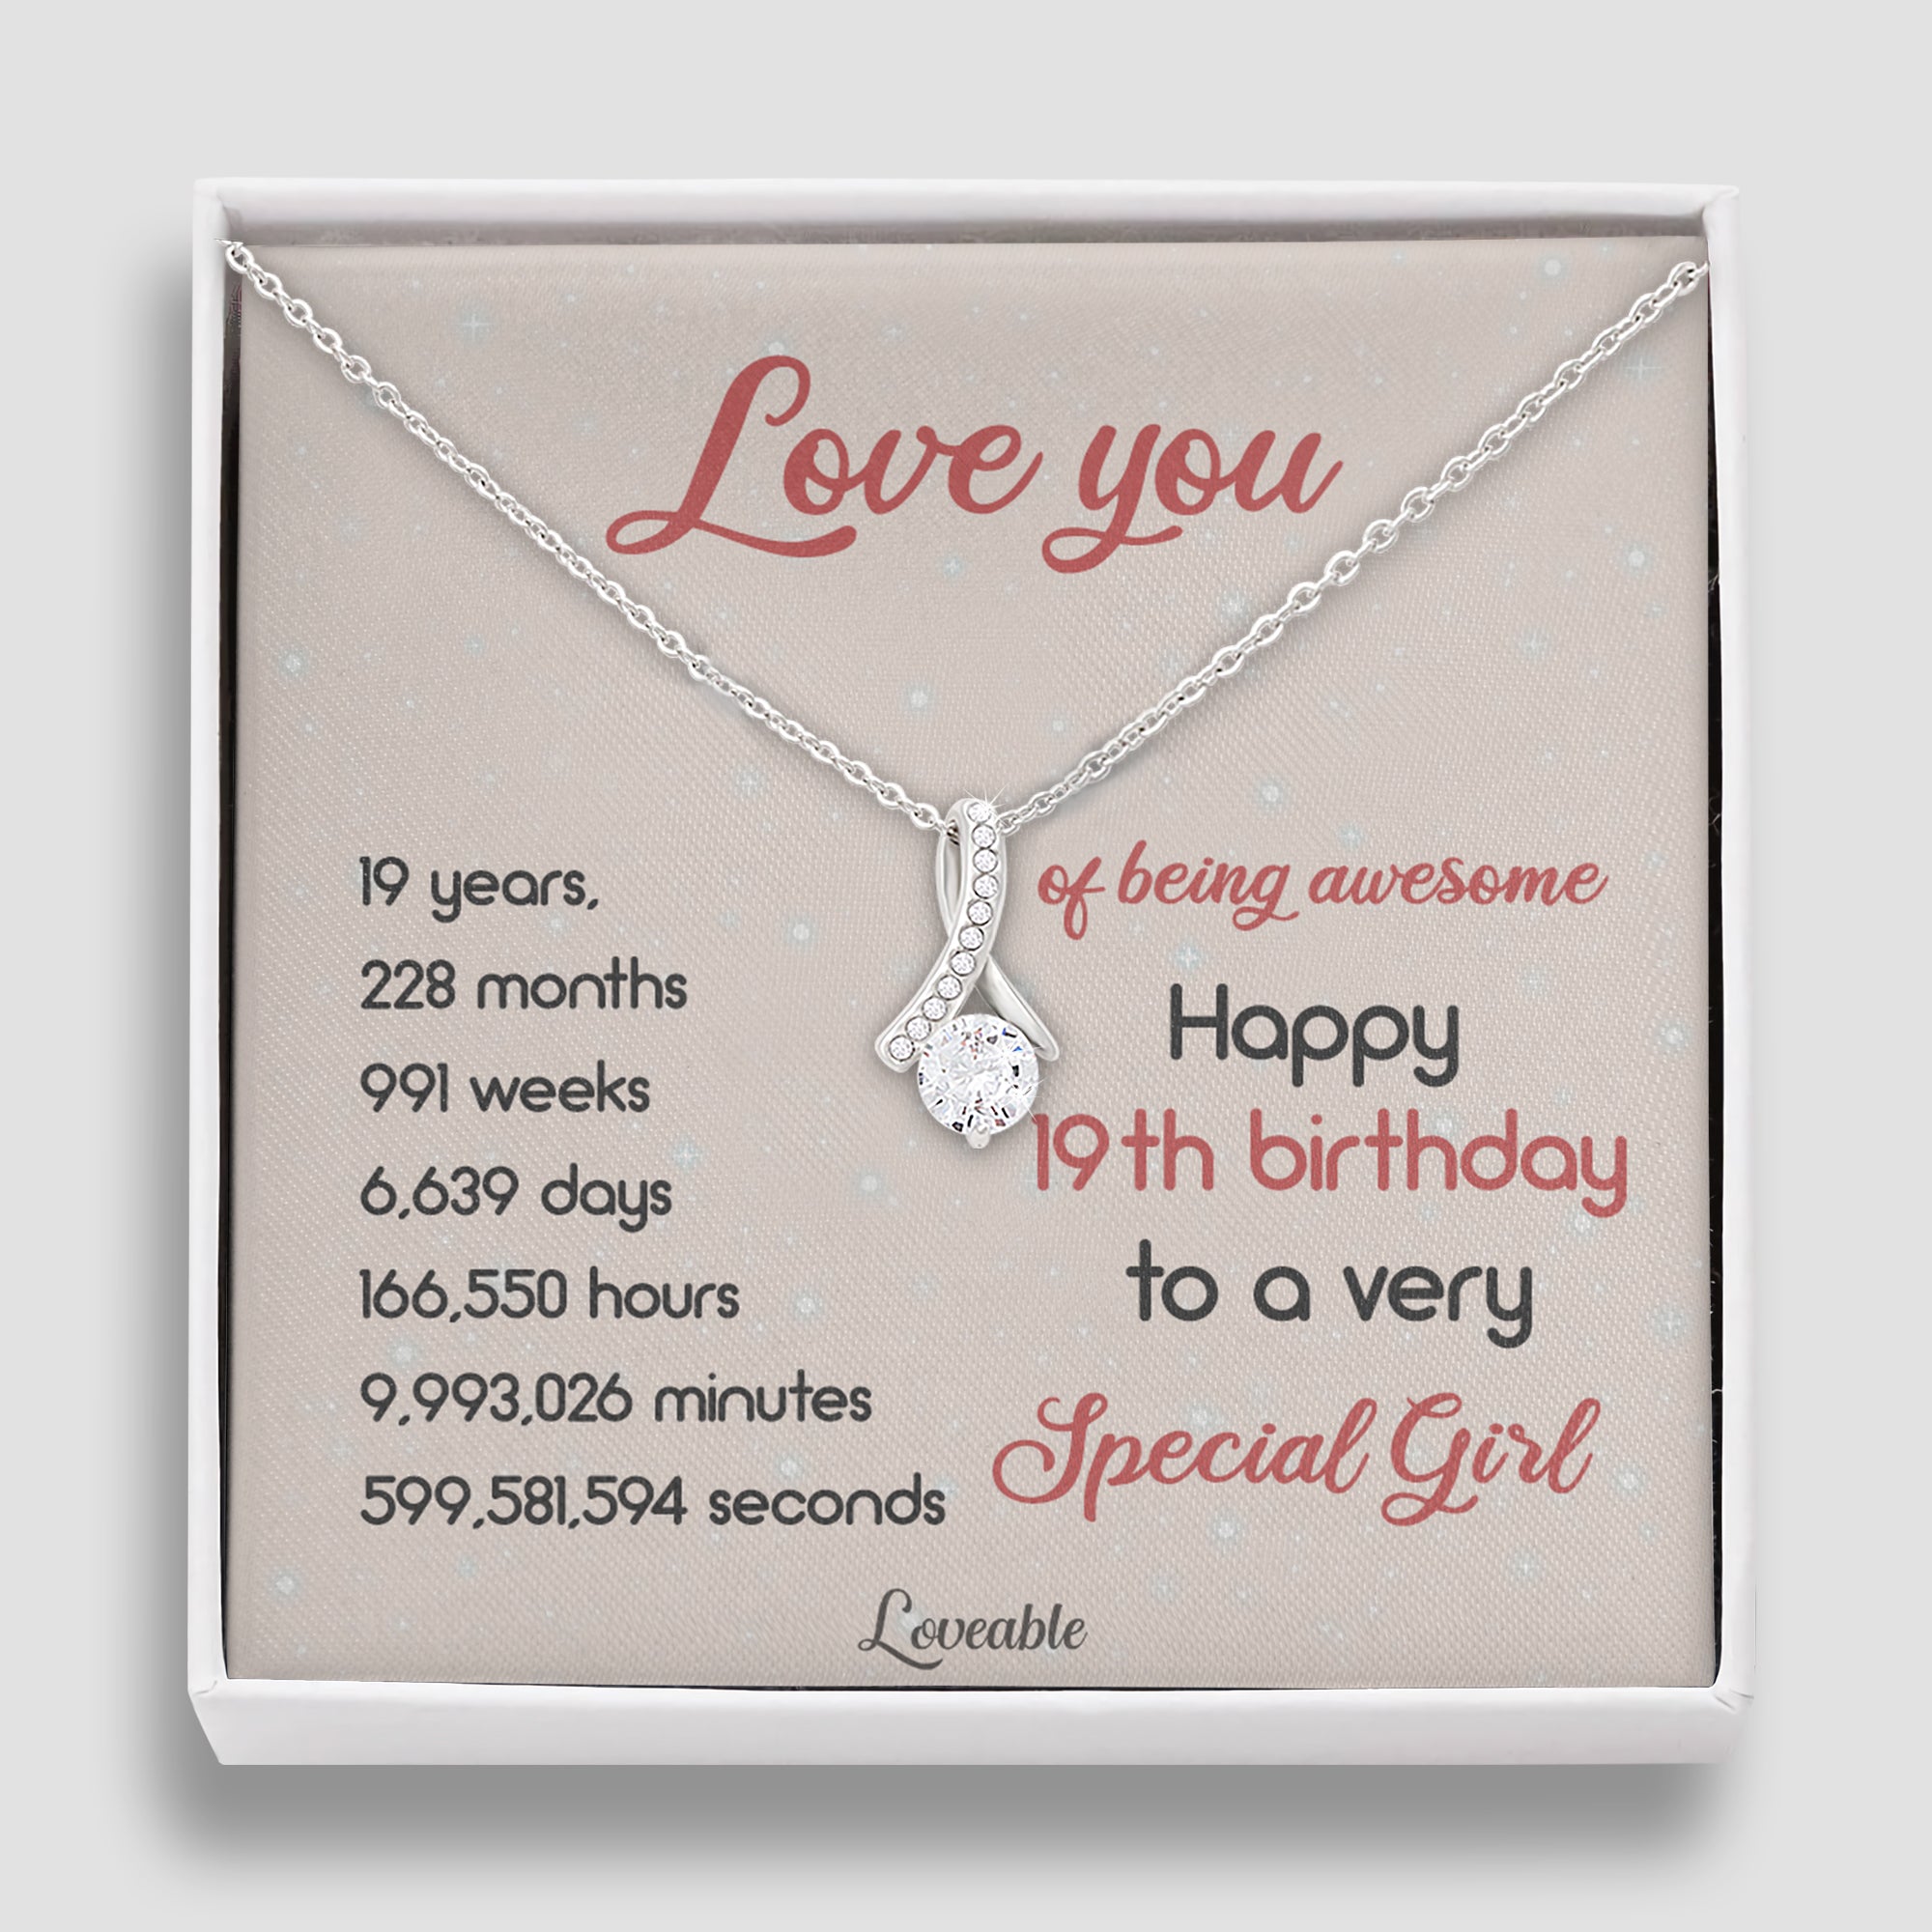 Happy 19th Birthday to a very Special Girl - Best 19th Birthday Gift Idea for Her